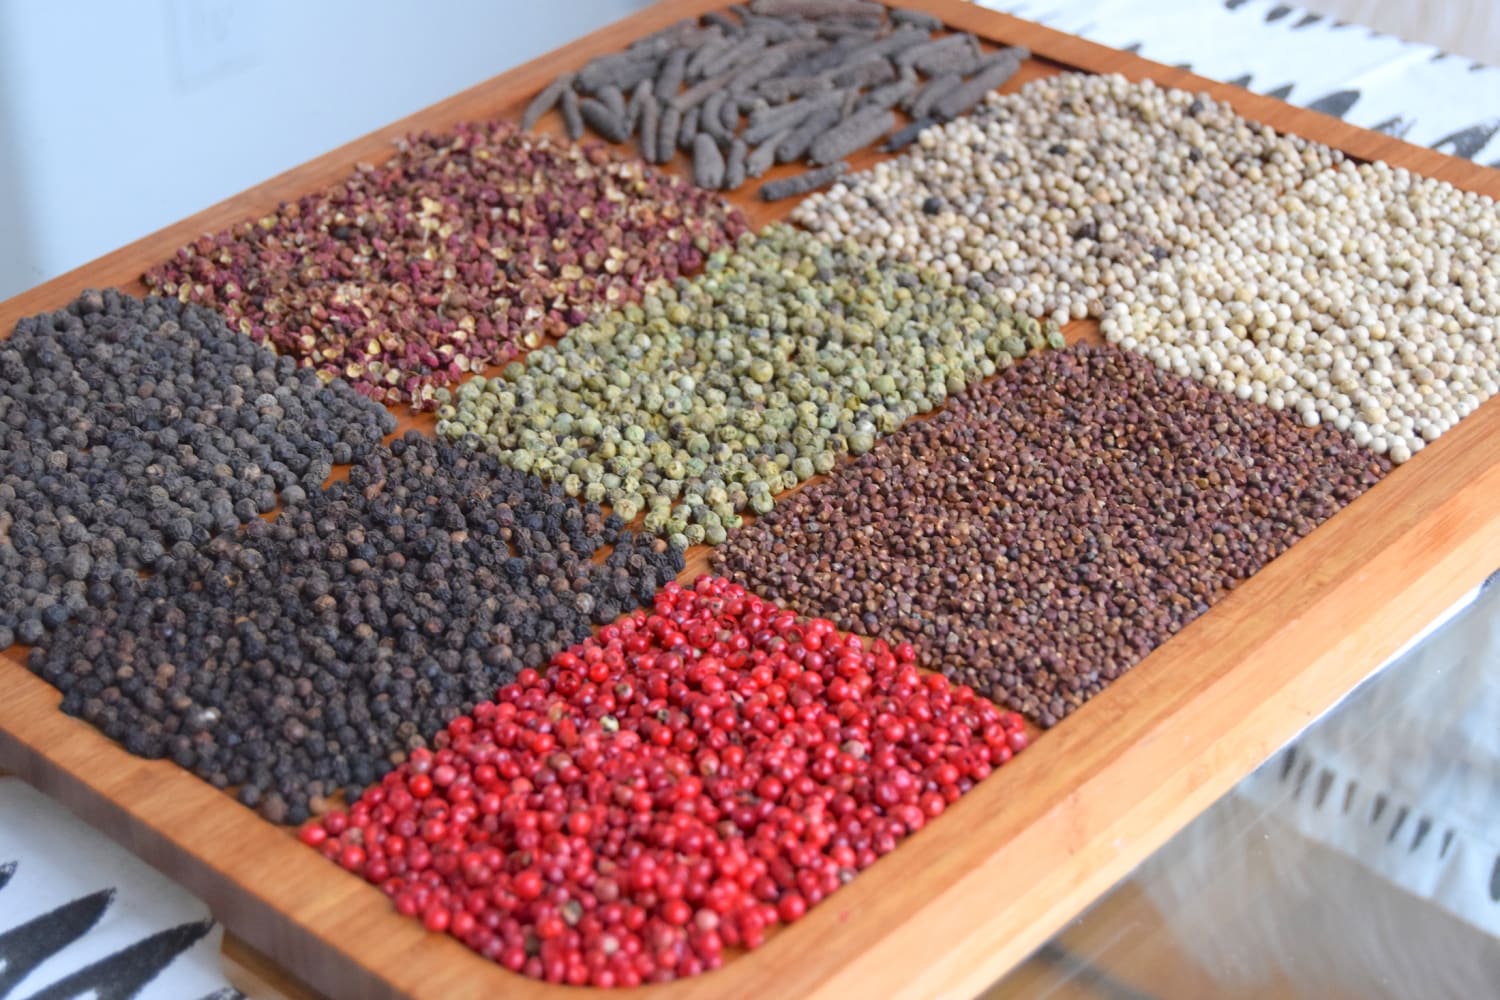 What Are The Different Kinds Of Peppercorns?